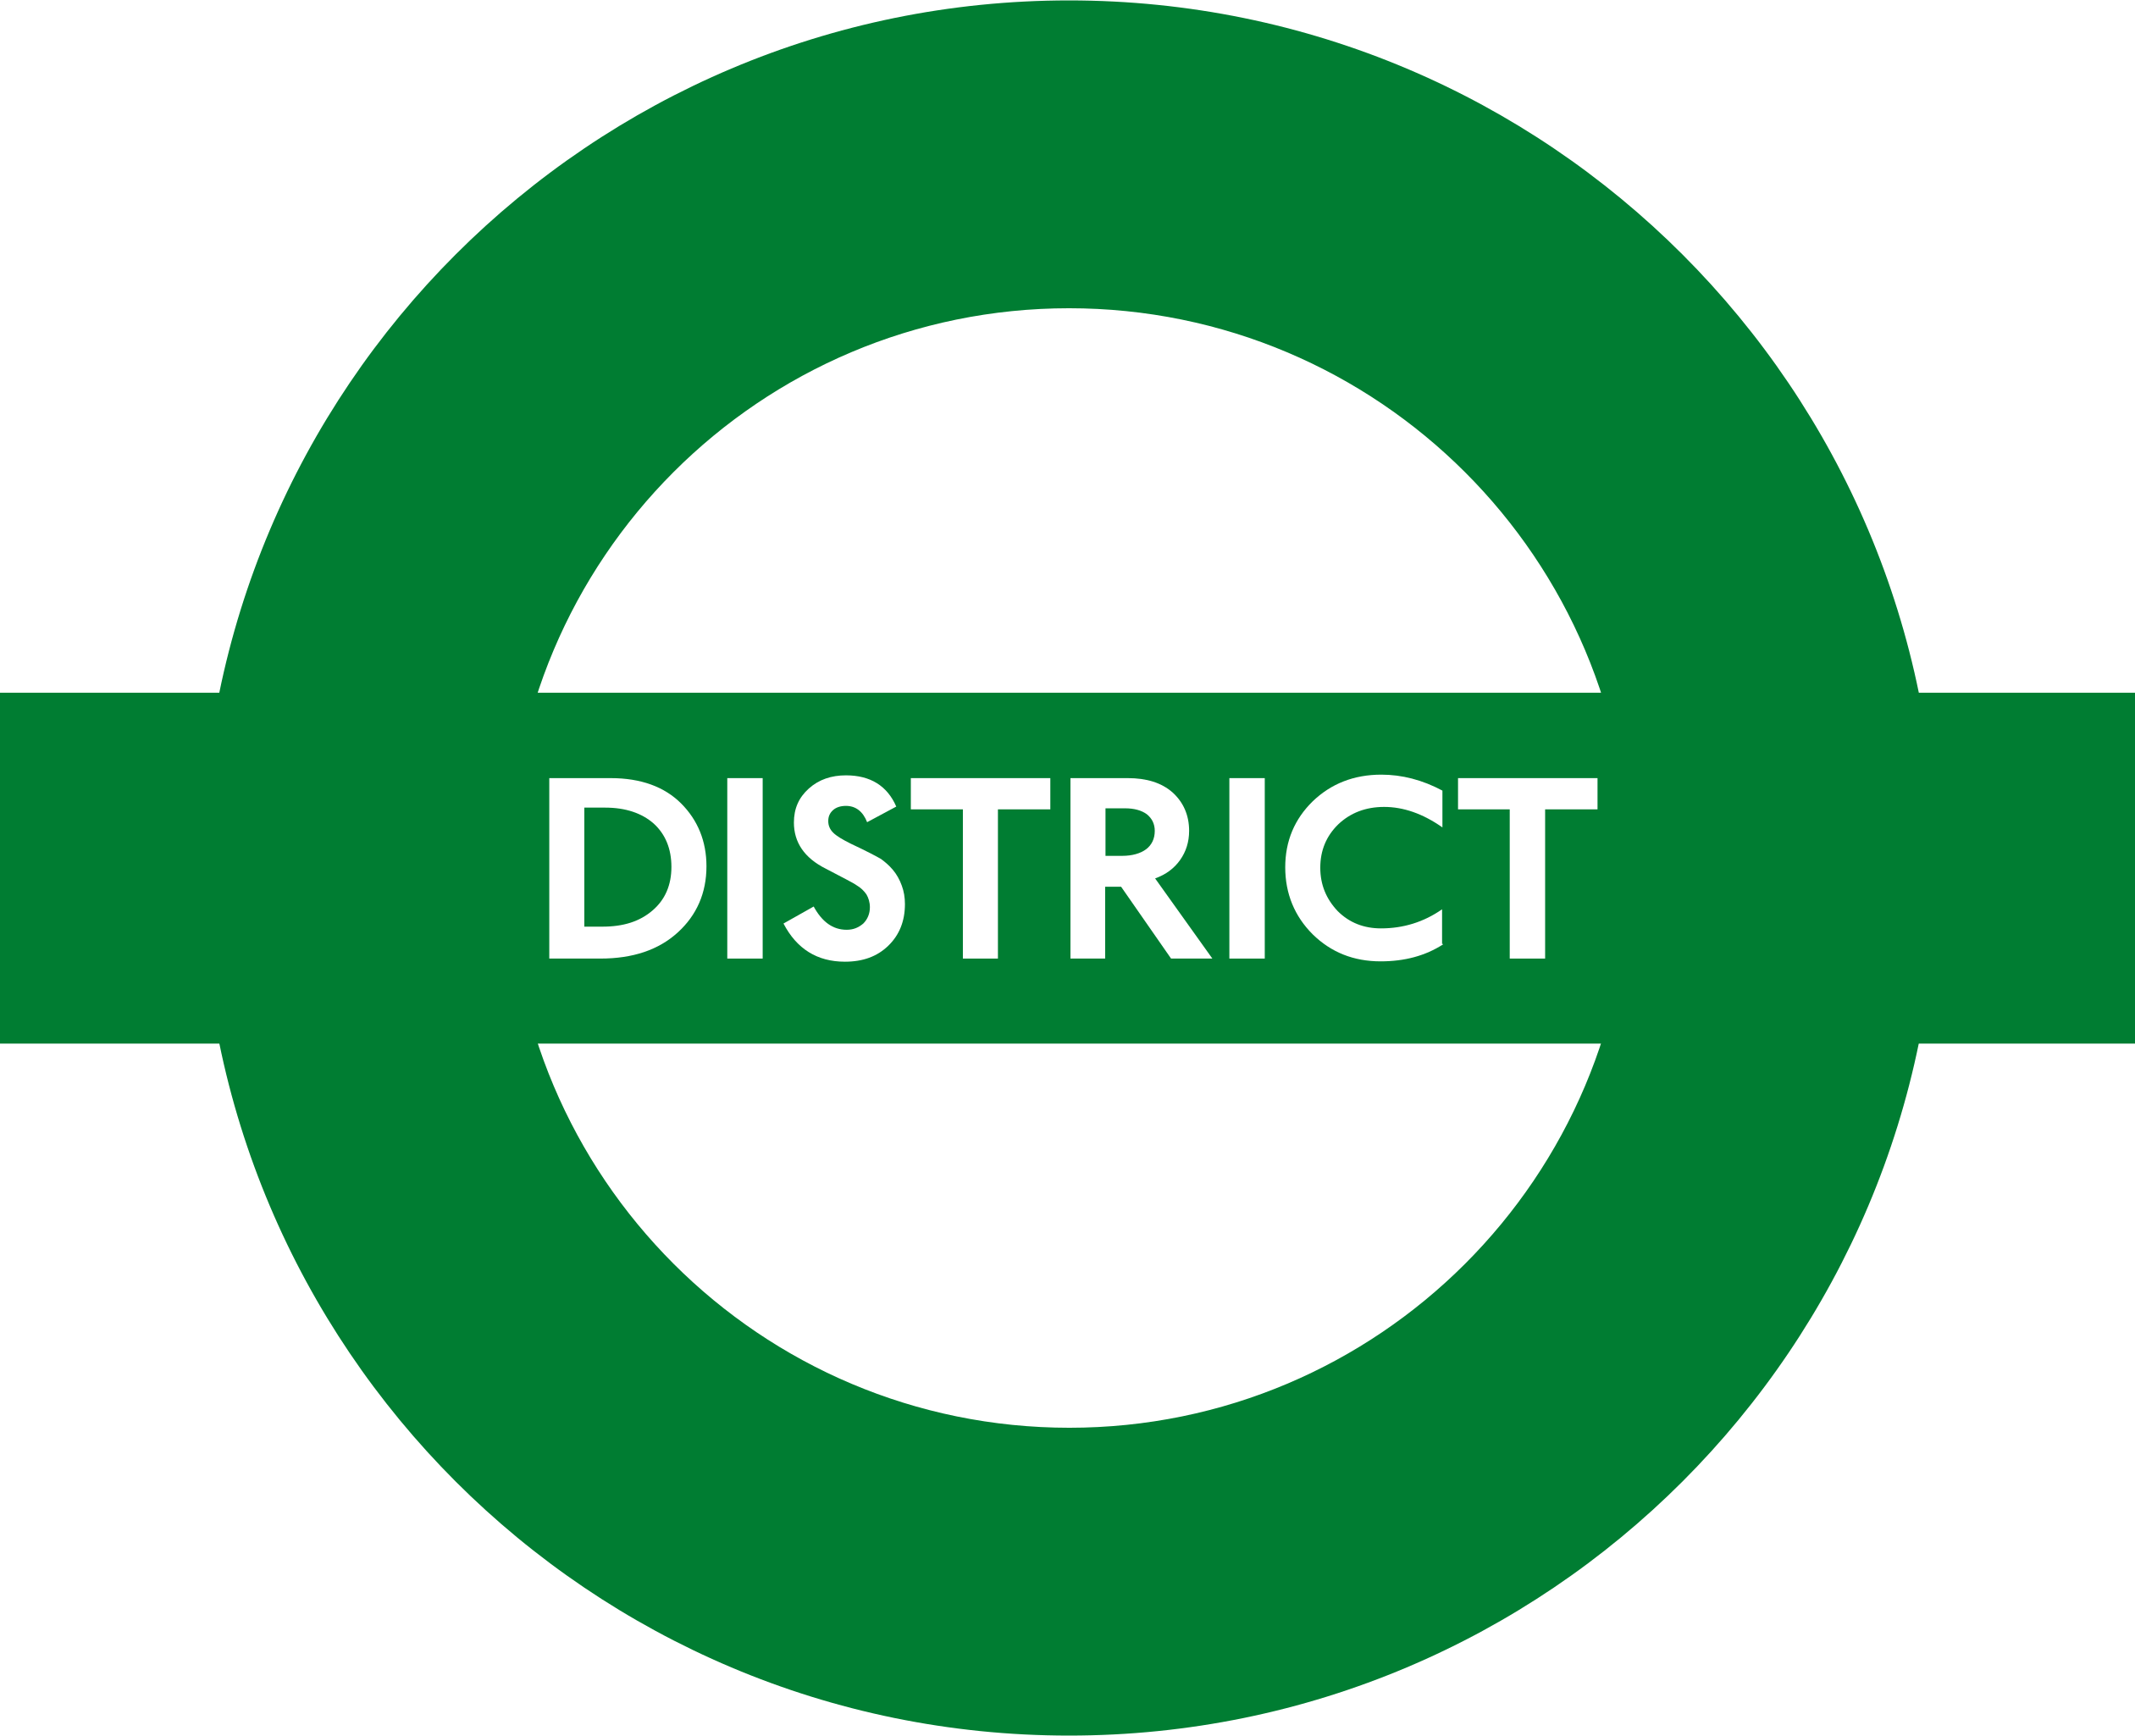 london tube lines ranked - district logo